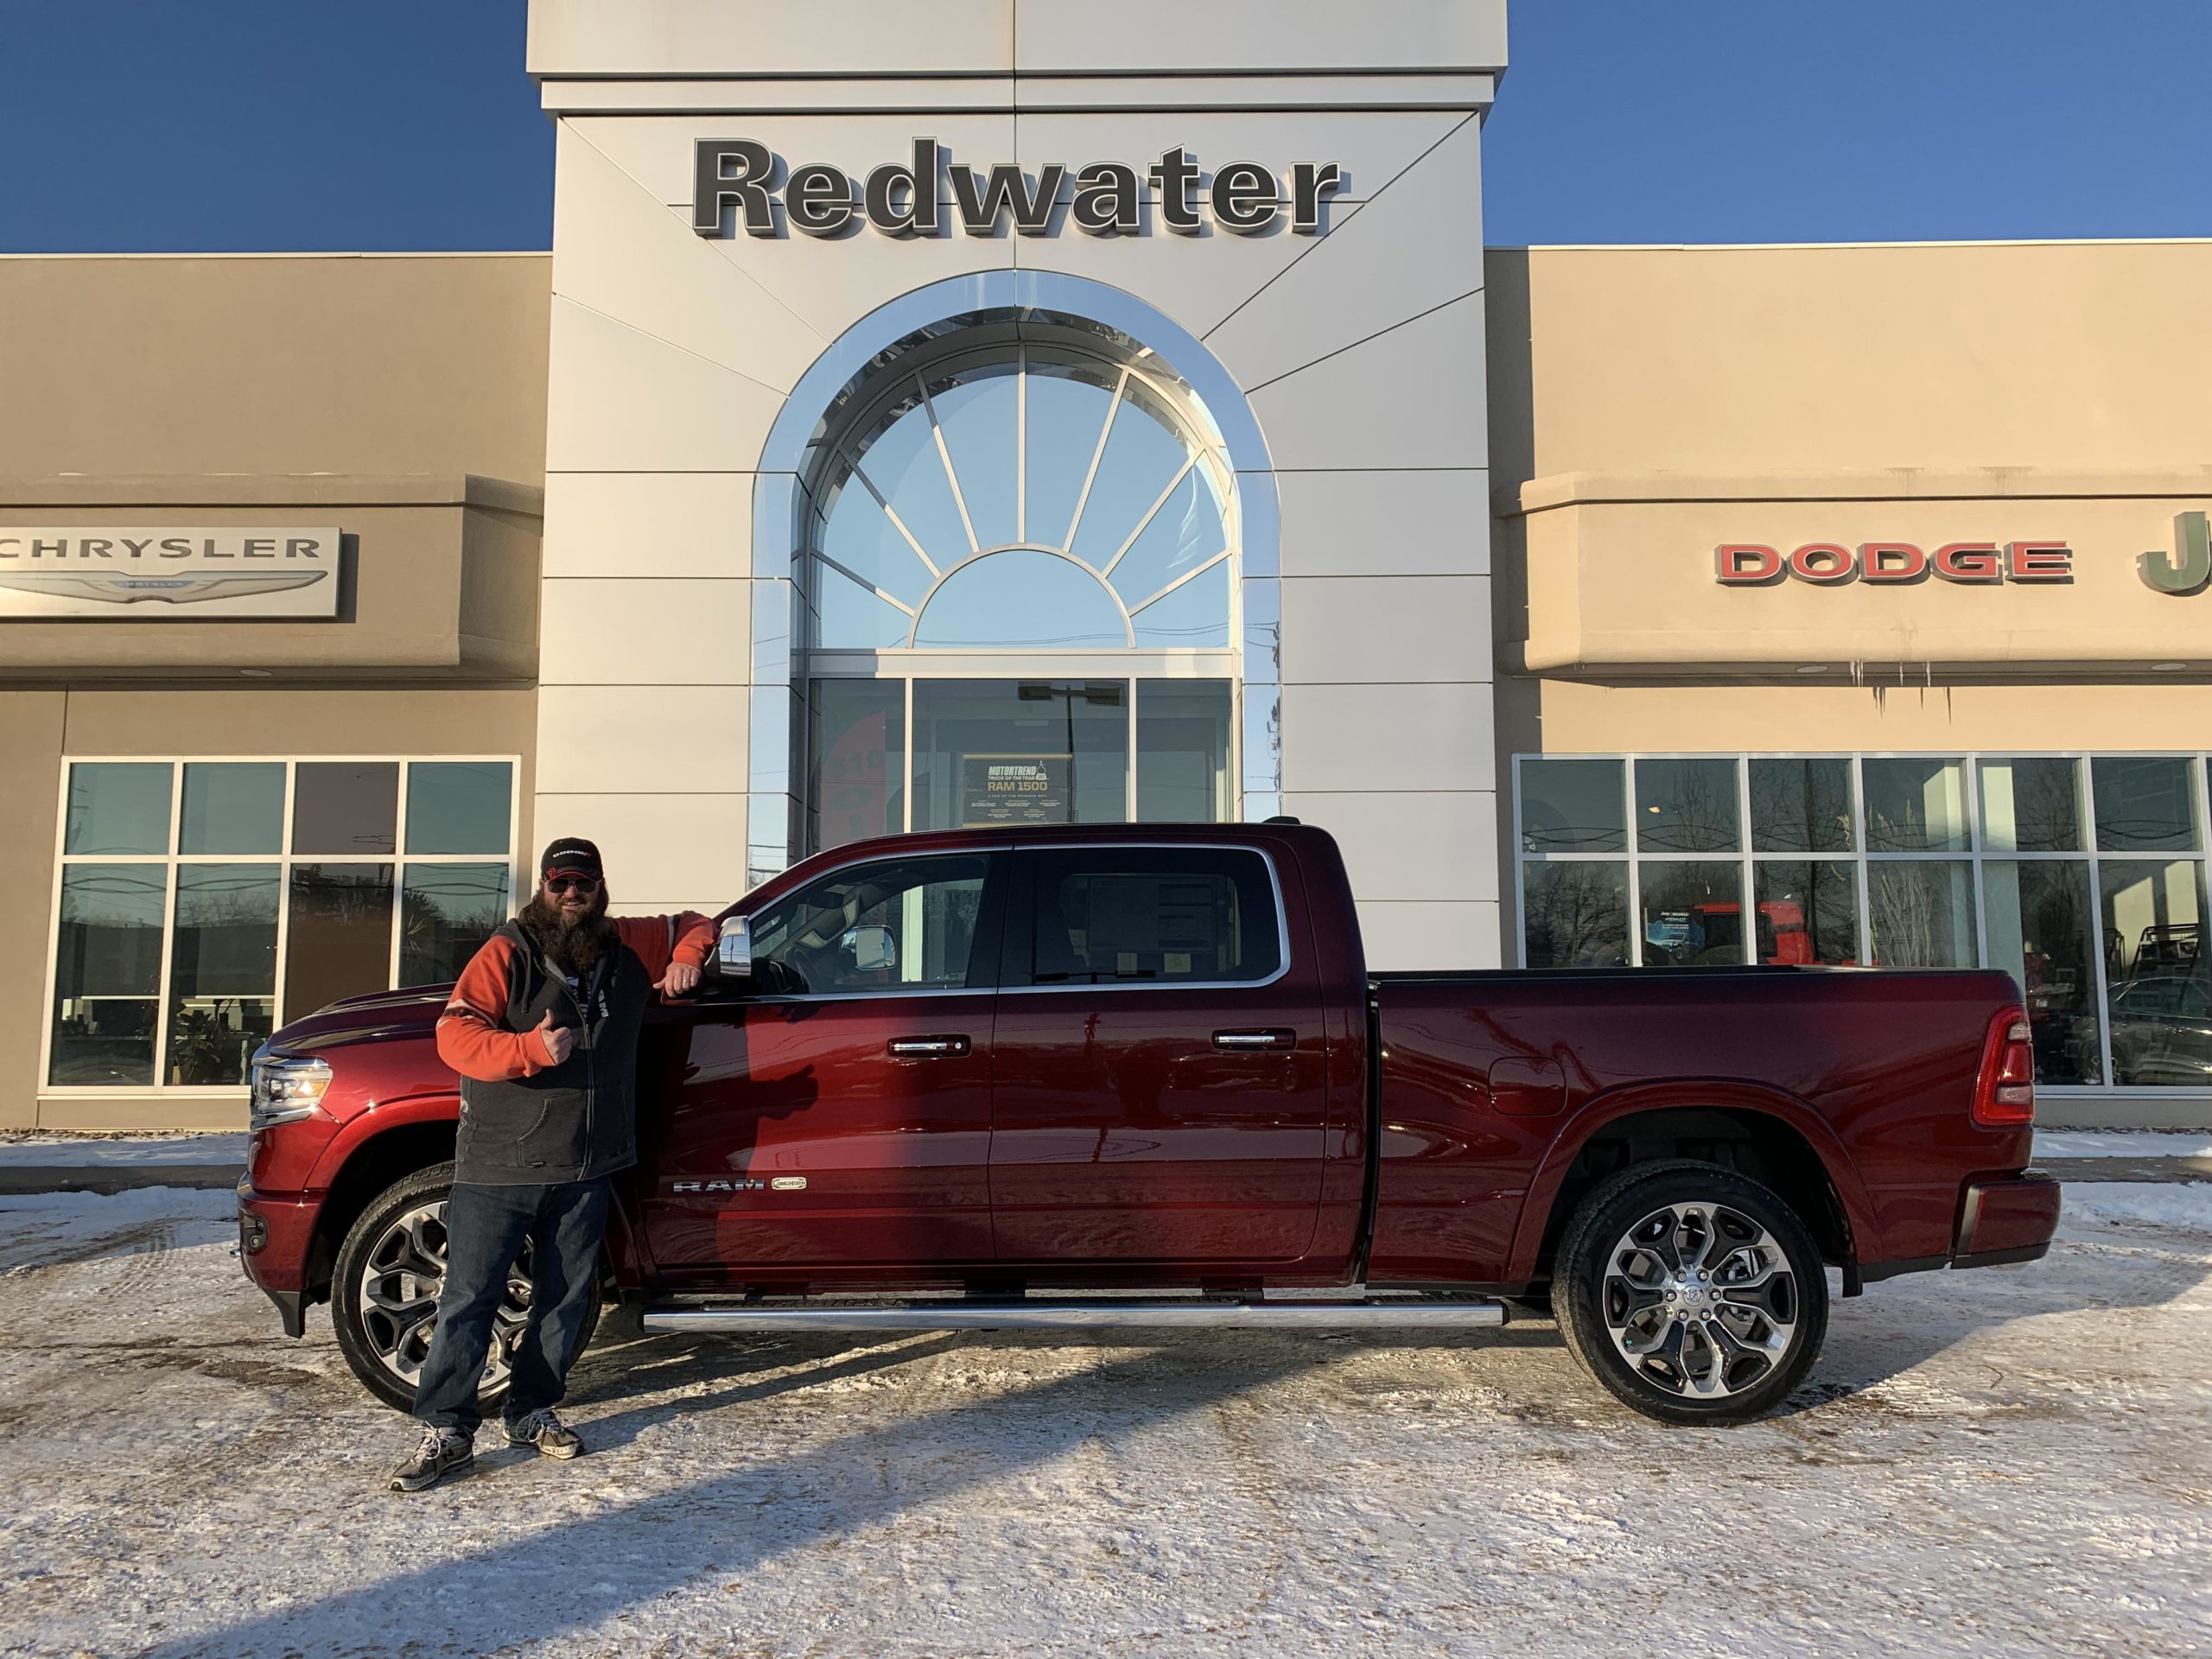 NR16317 New 2022 Ram 1500 Limited Longhorn Crew Cab 4x4 Redwater Dodge